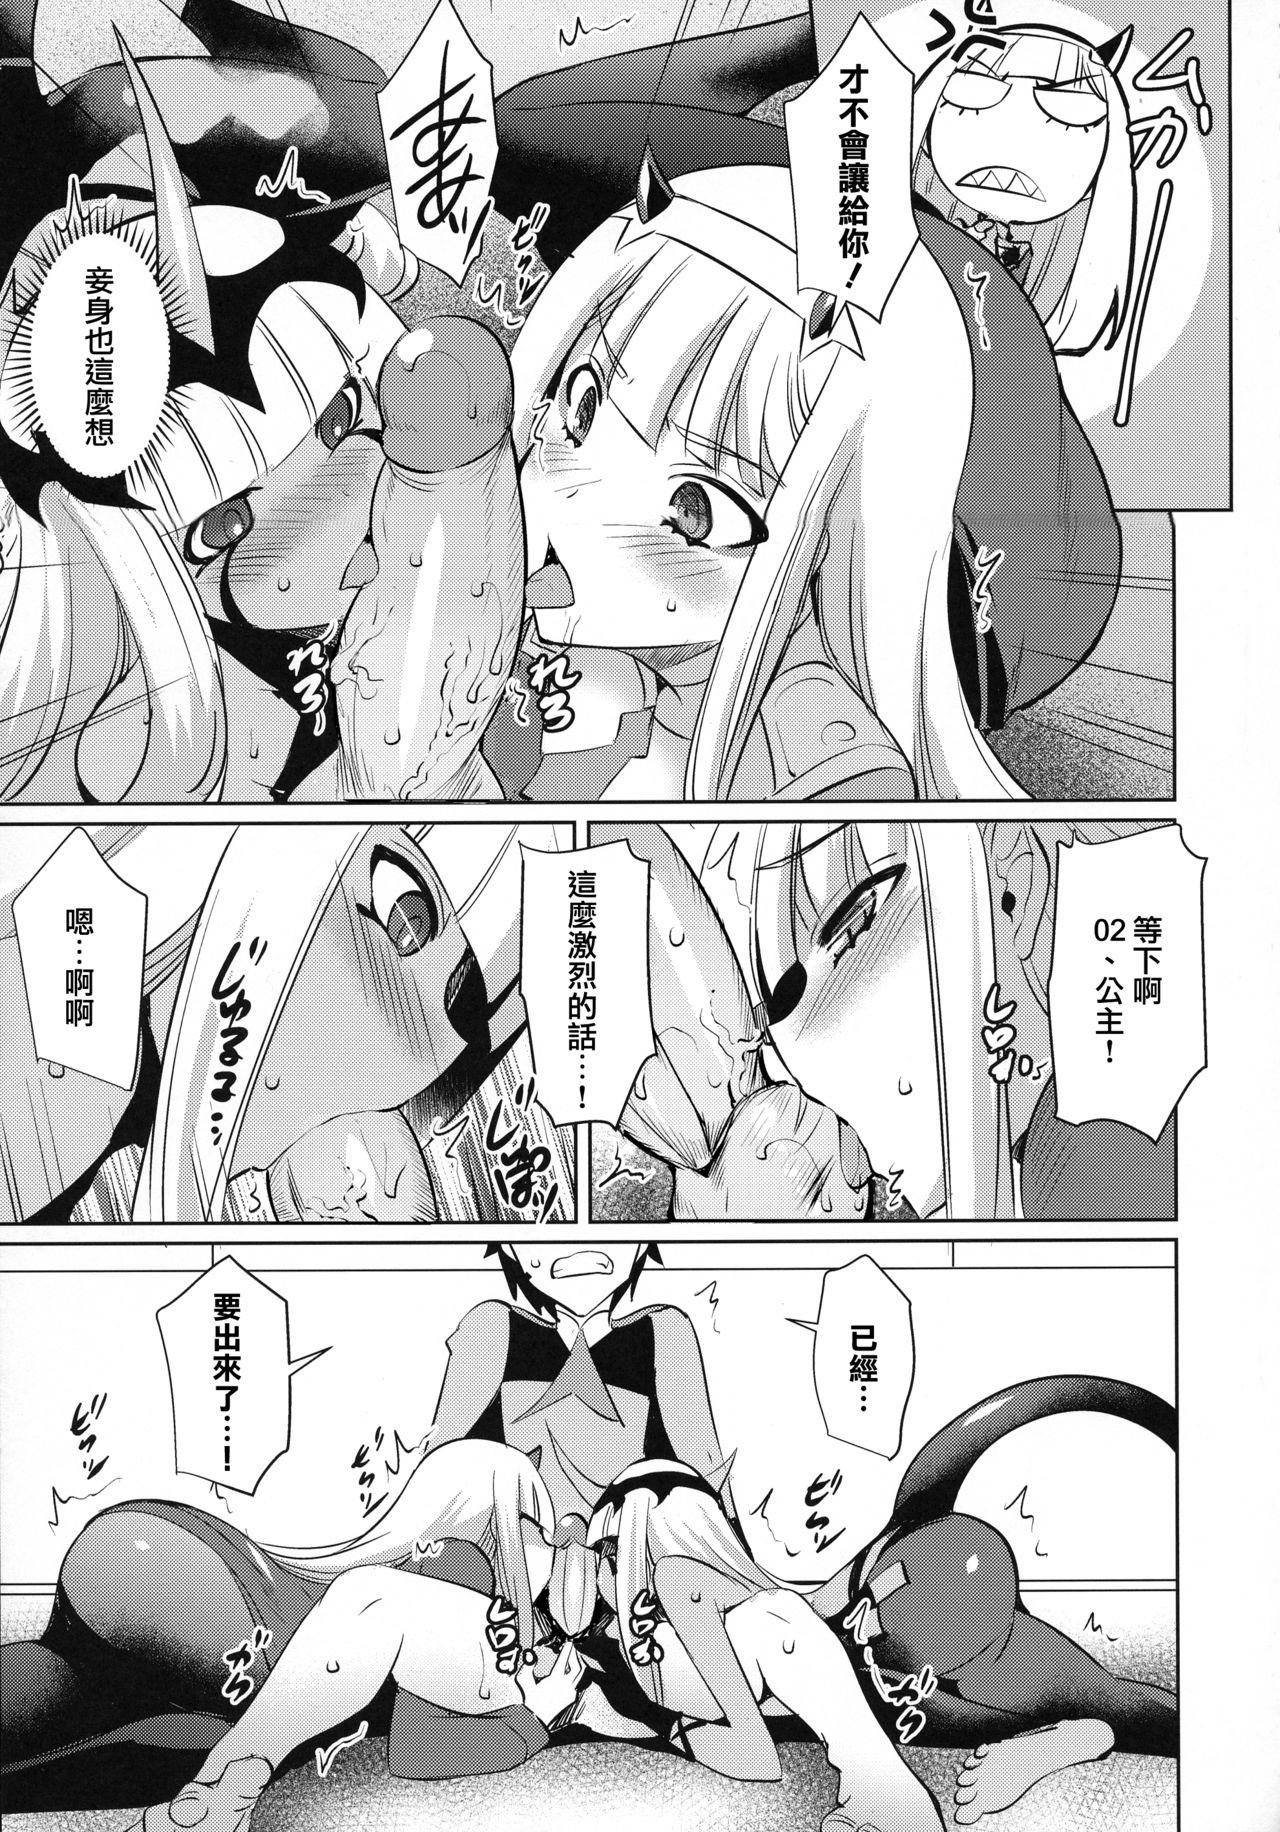 Forbidden Darling in the One and Two - Darling in the franxx Lick - Page 8